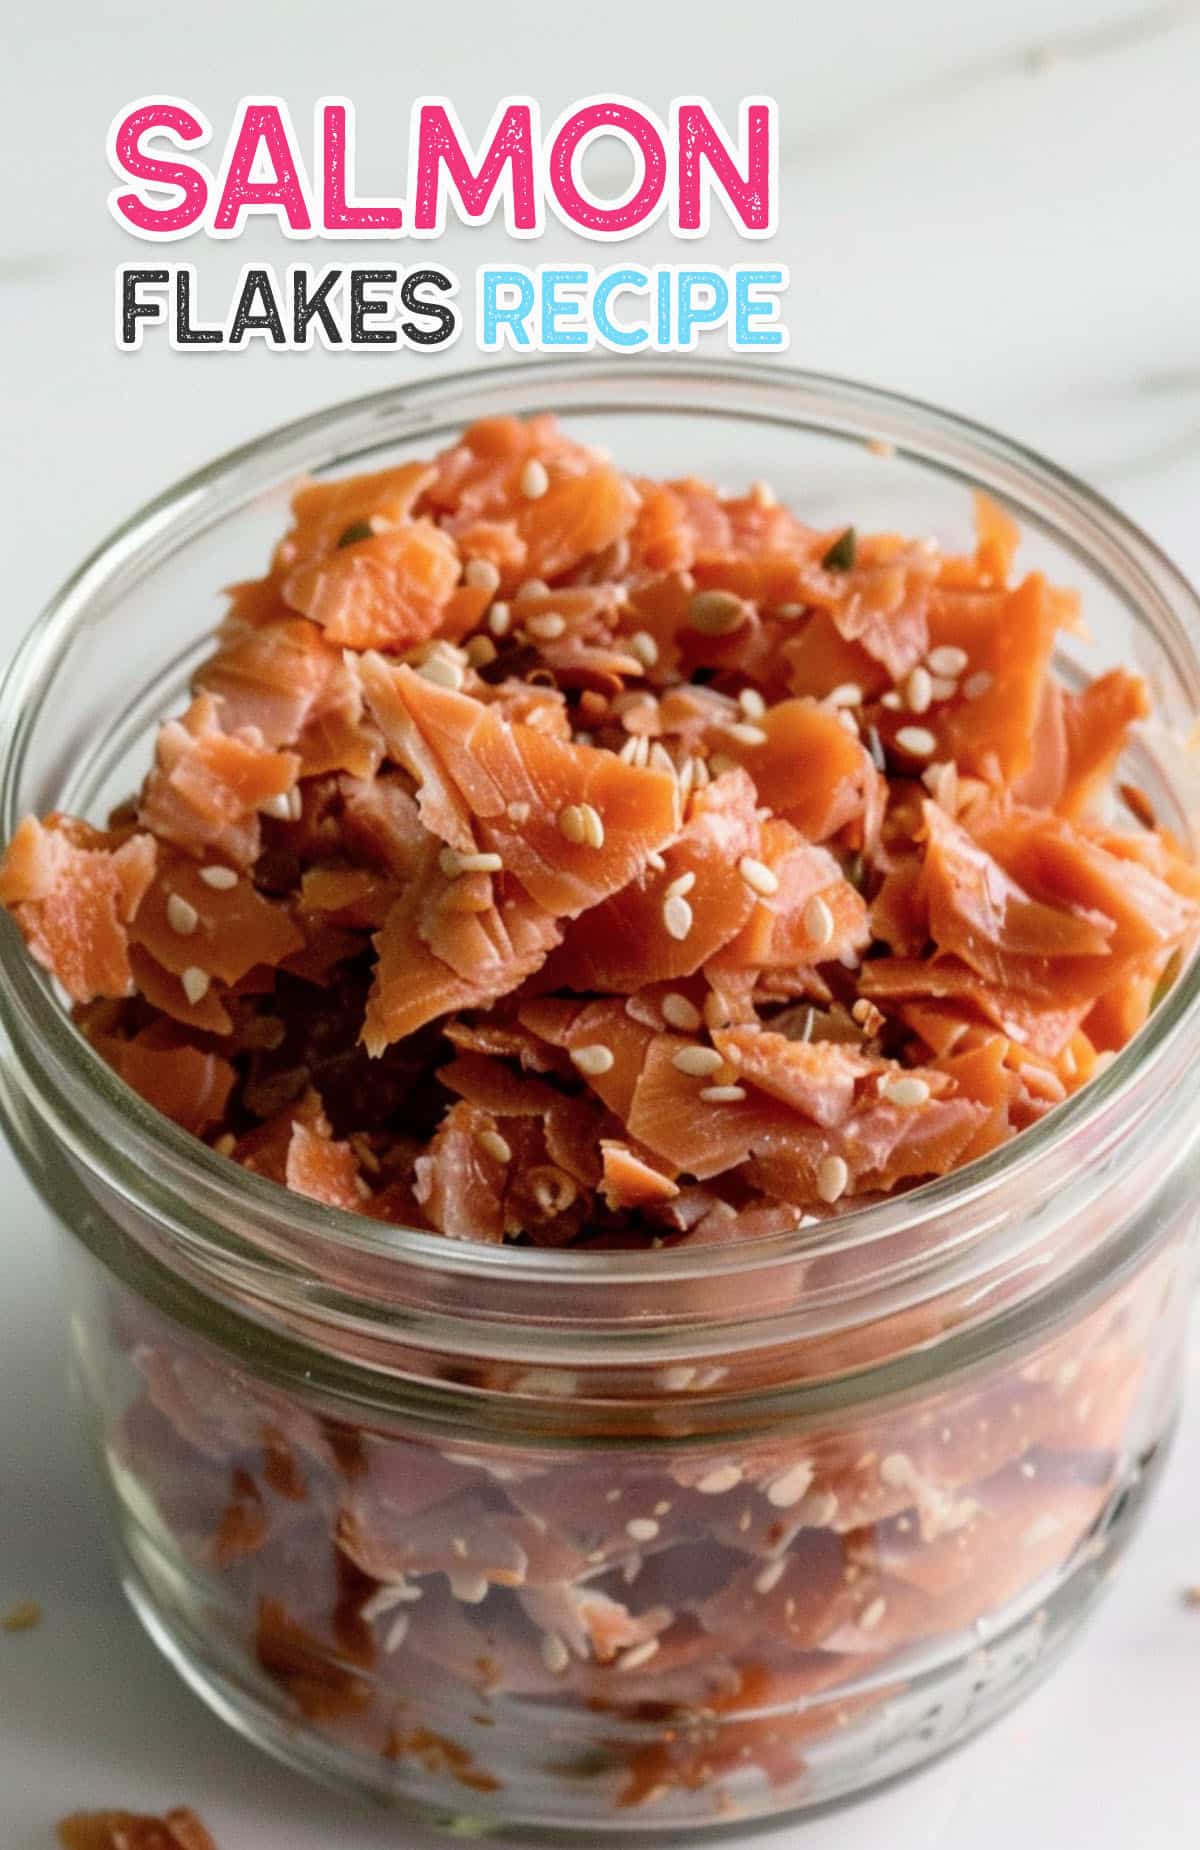 Close-up of pink, flaky salmon flakes in a glass jar, ready for recipes.